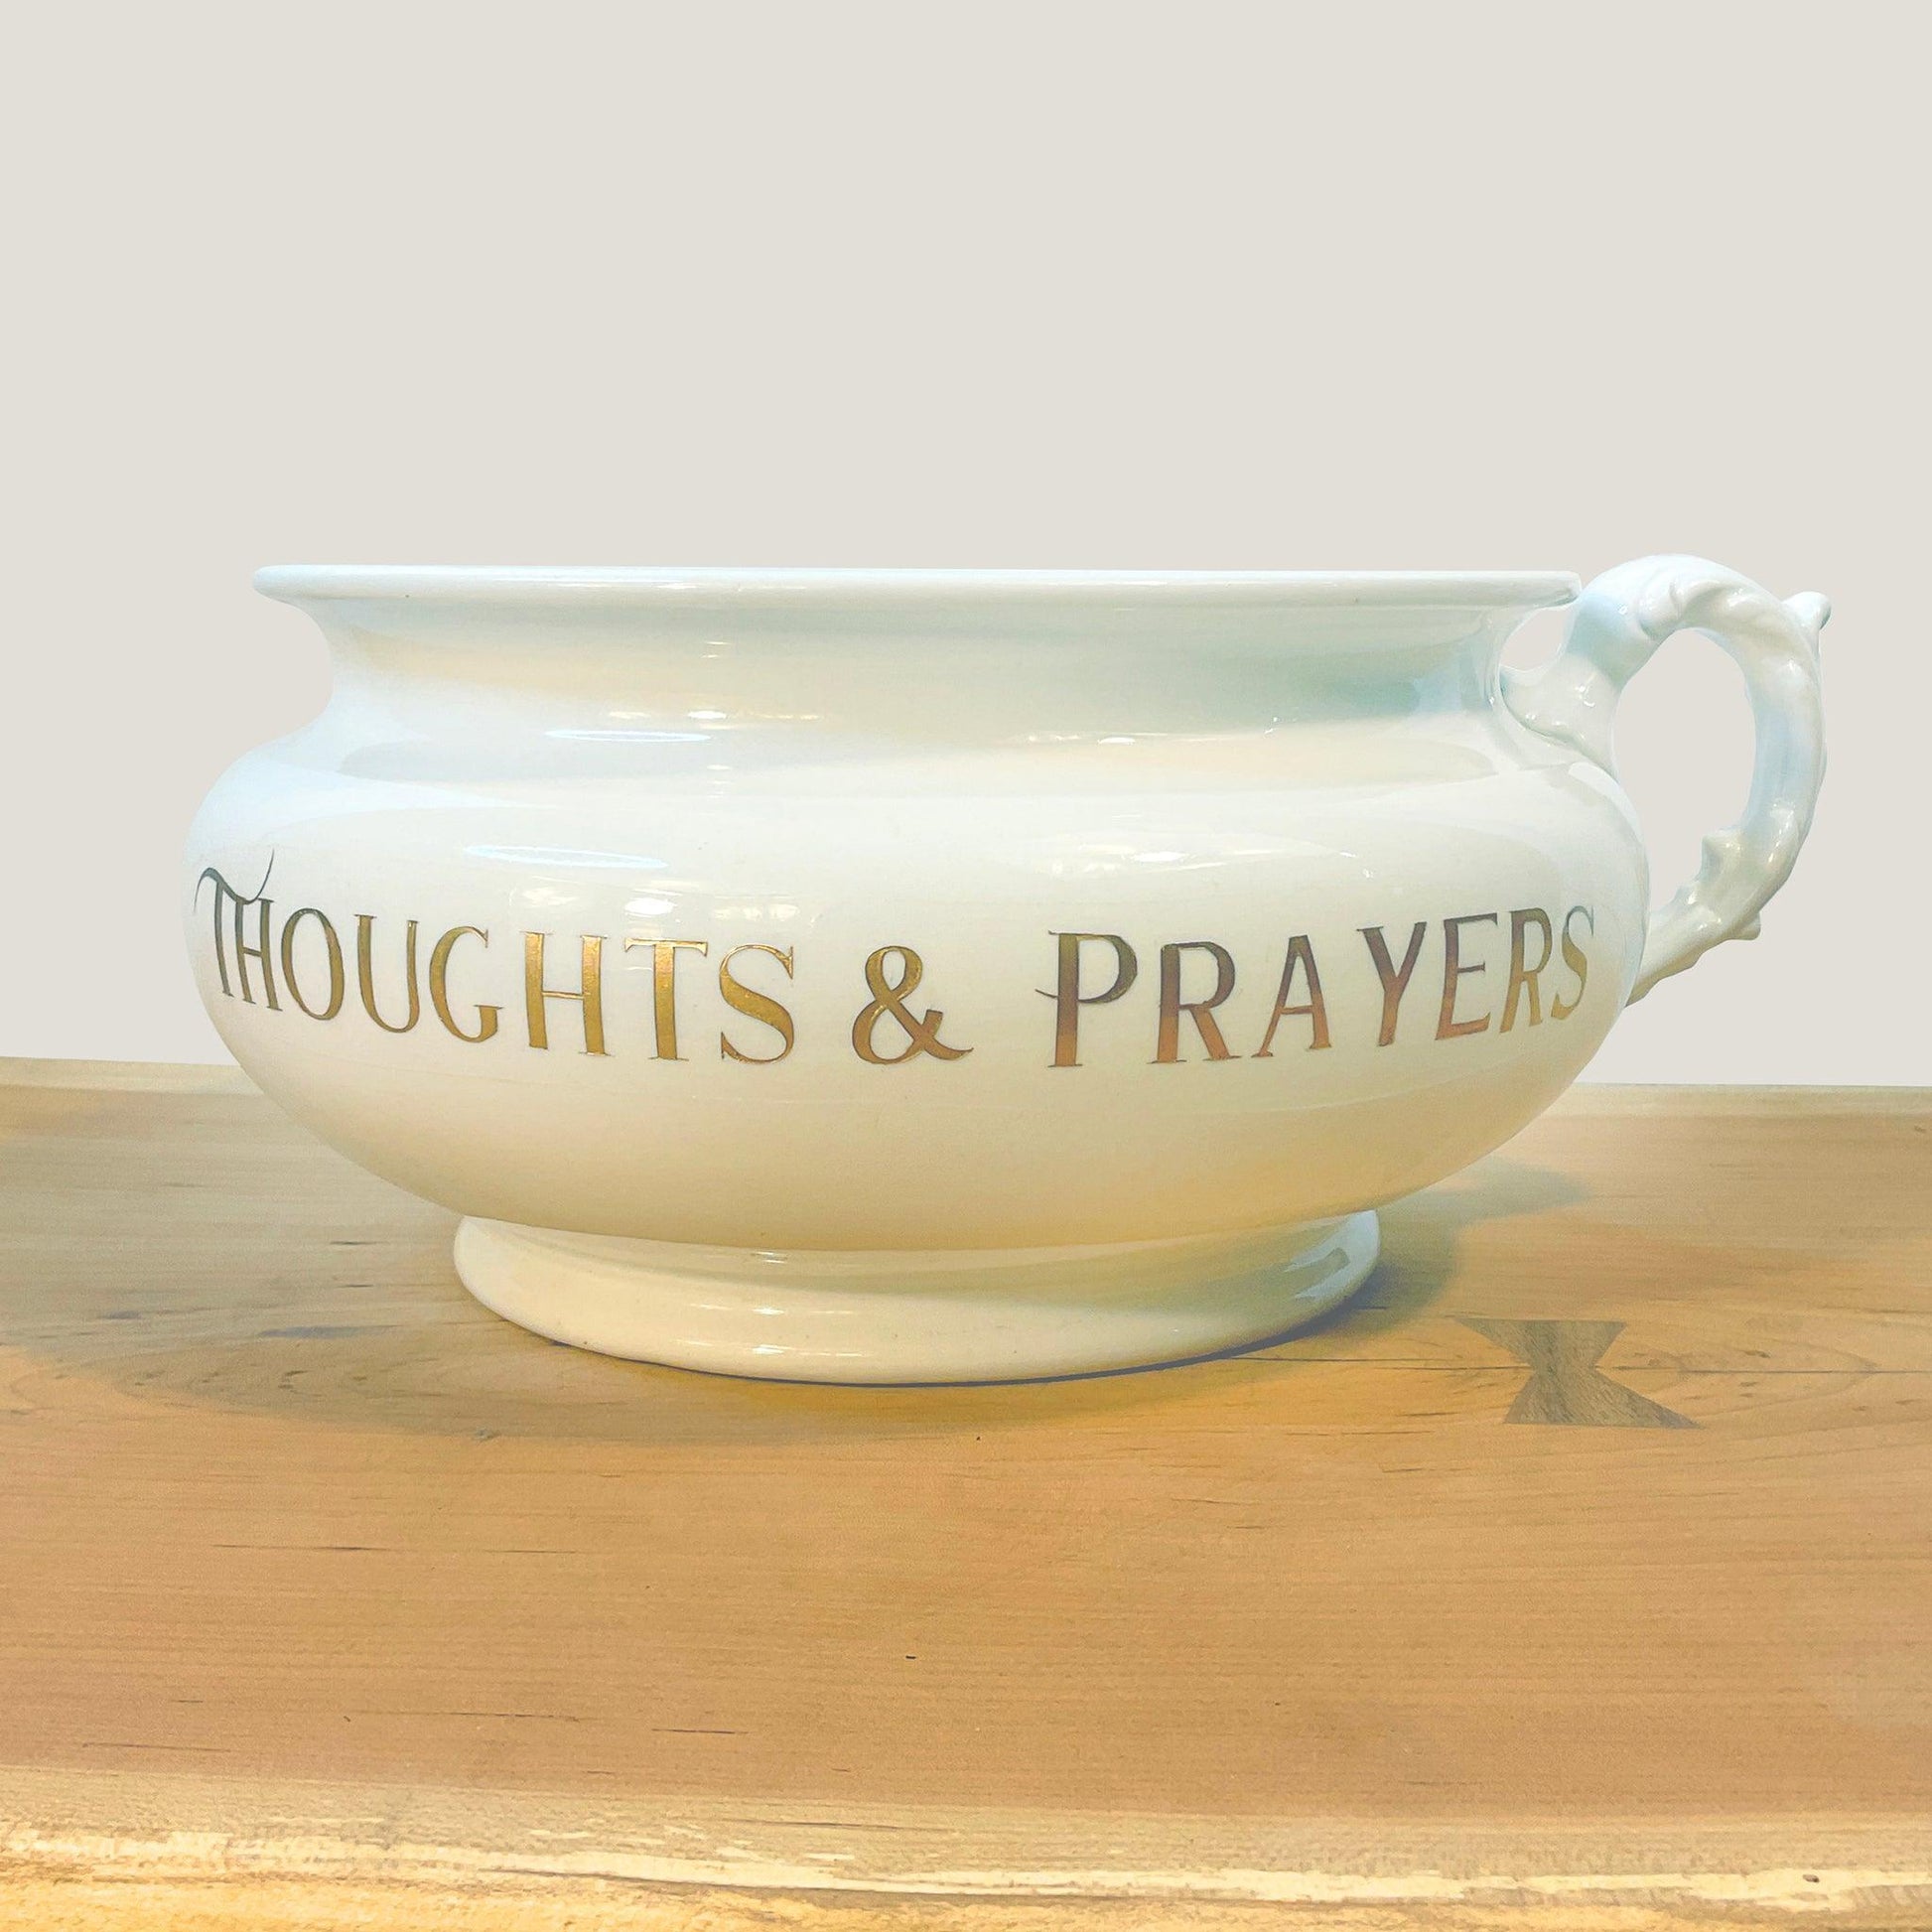 Thoughts & Prayers Chamber Pot - Offensively Domestic